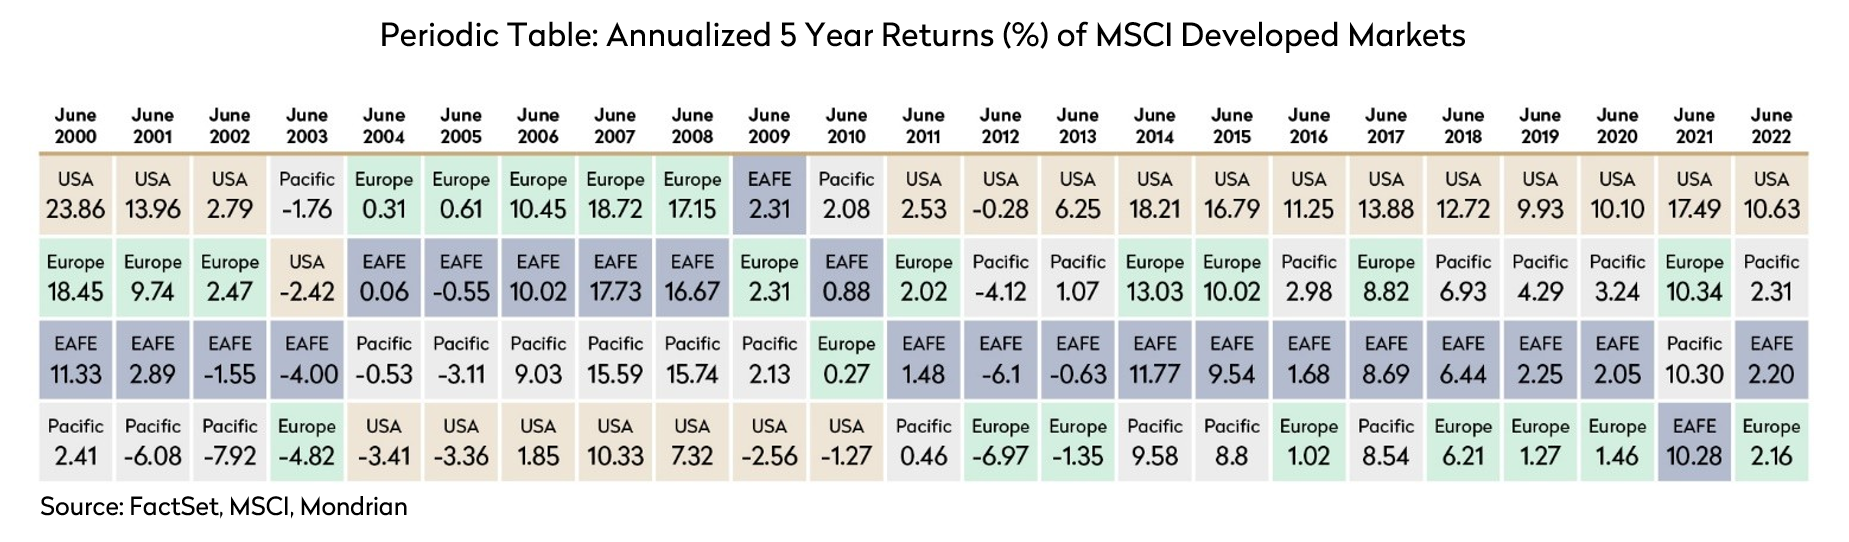 Periodic Table annualized 5 year return percent of MSCI Developed Markets